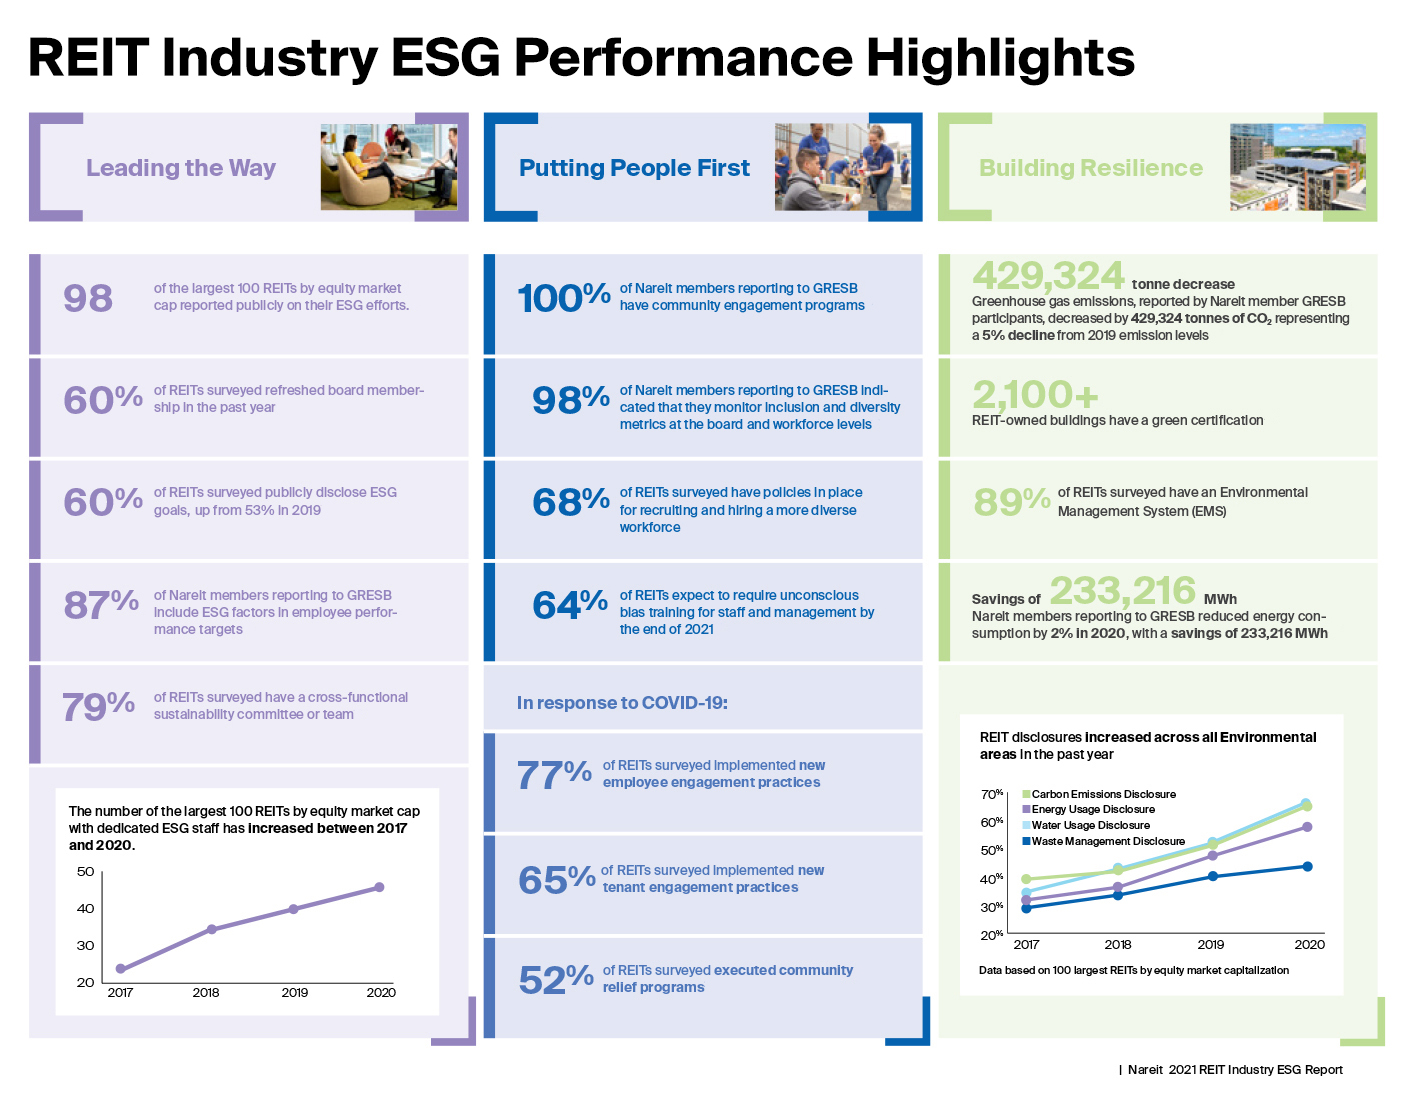 Chart showing REIT Industry ESG Performance Highlights